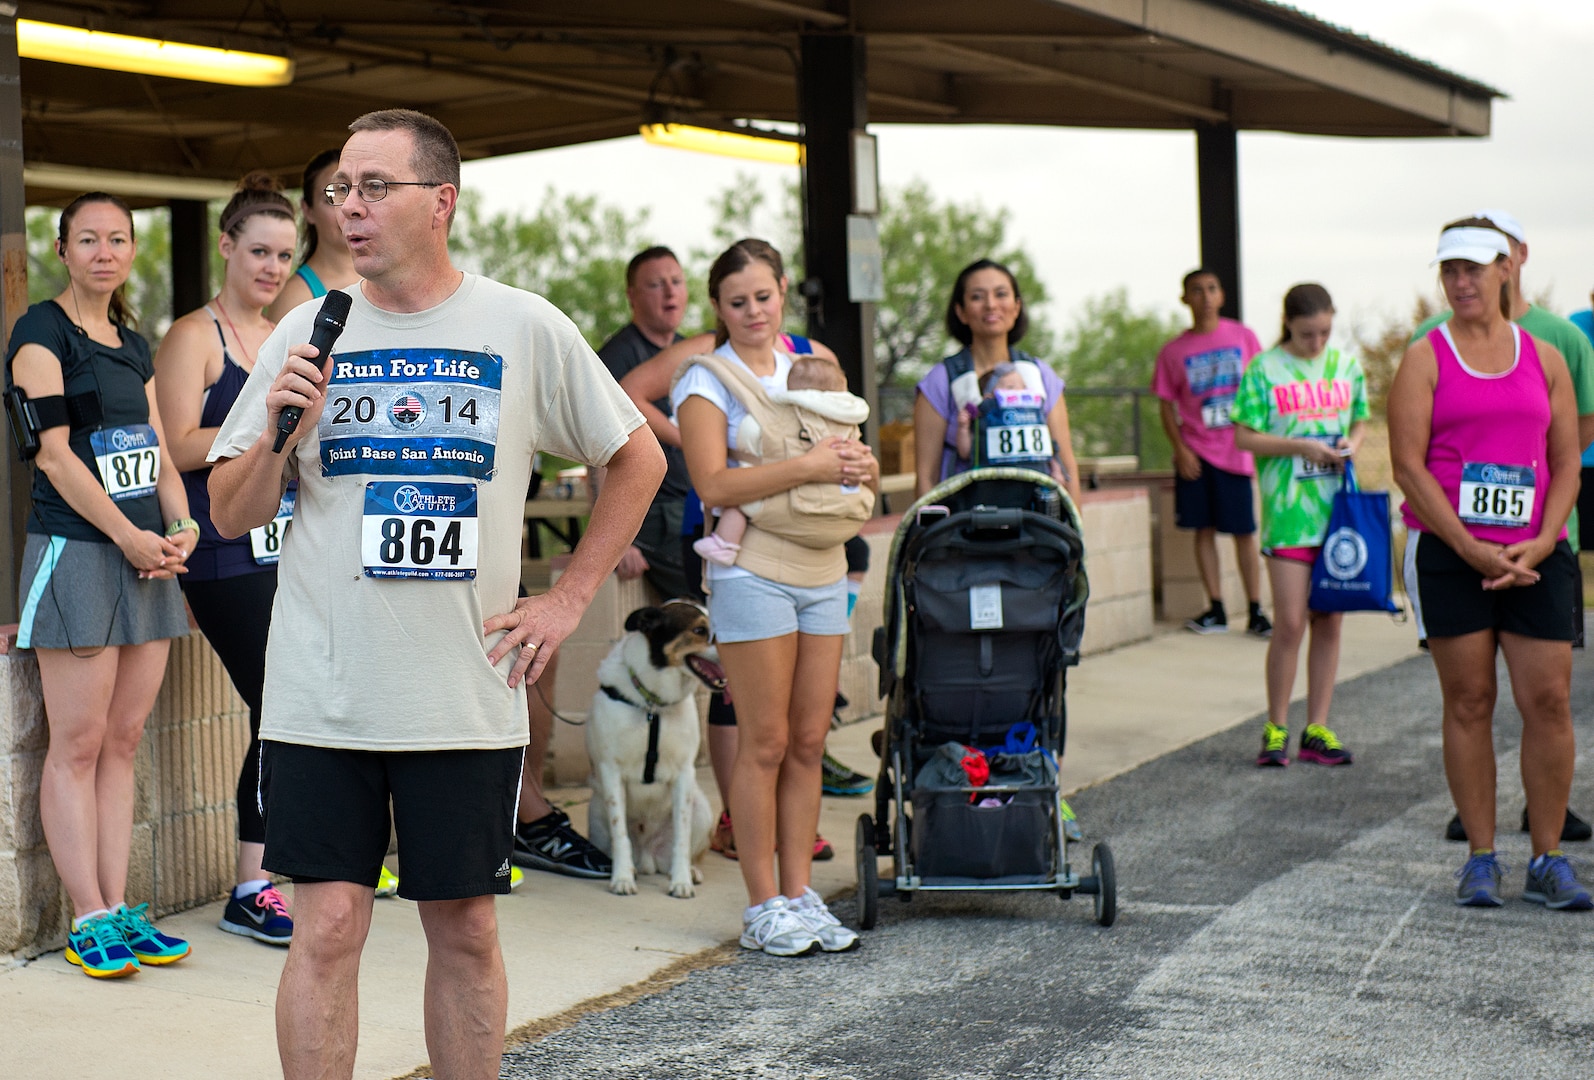 Col. John Andrus, 59th Medical Operations Group commander, delivers opening remarks at the 5k Run for life. (U.S. Air Force photo by Benjamin Faske/Released)
